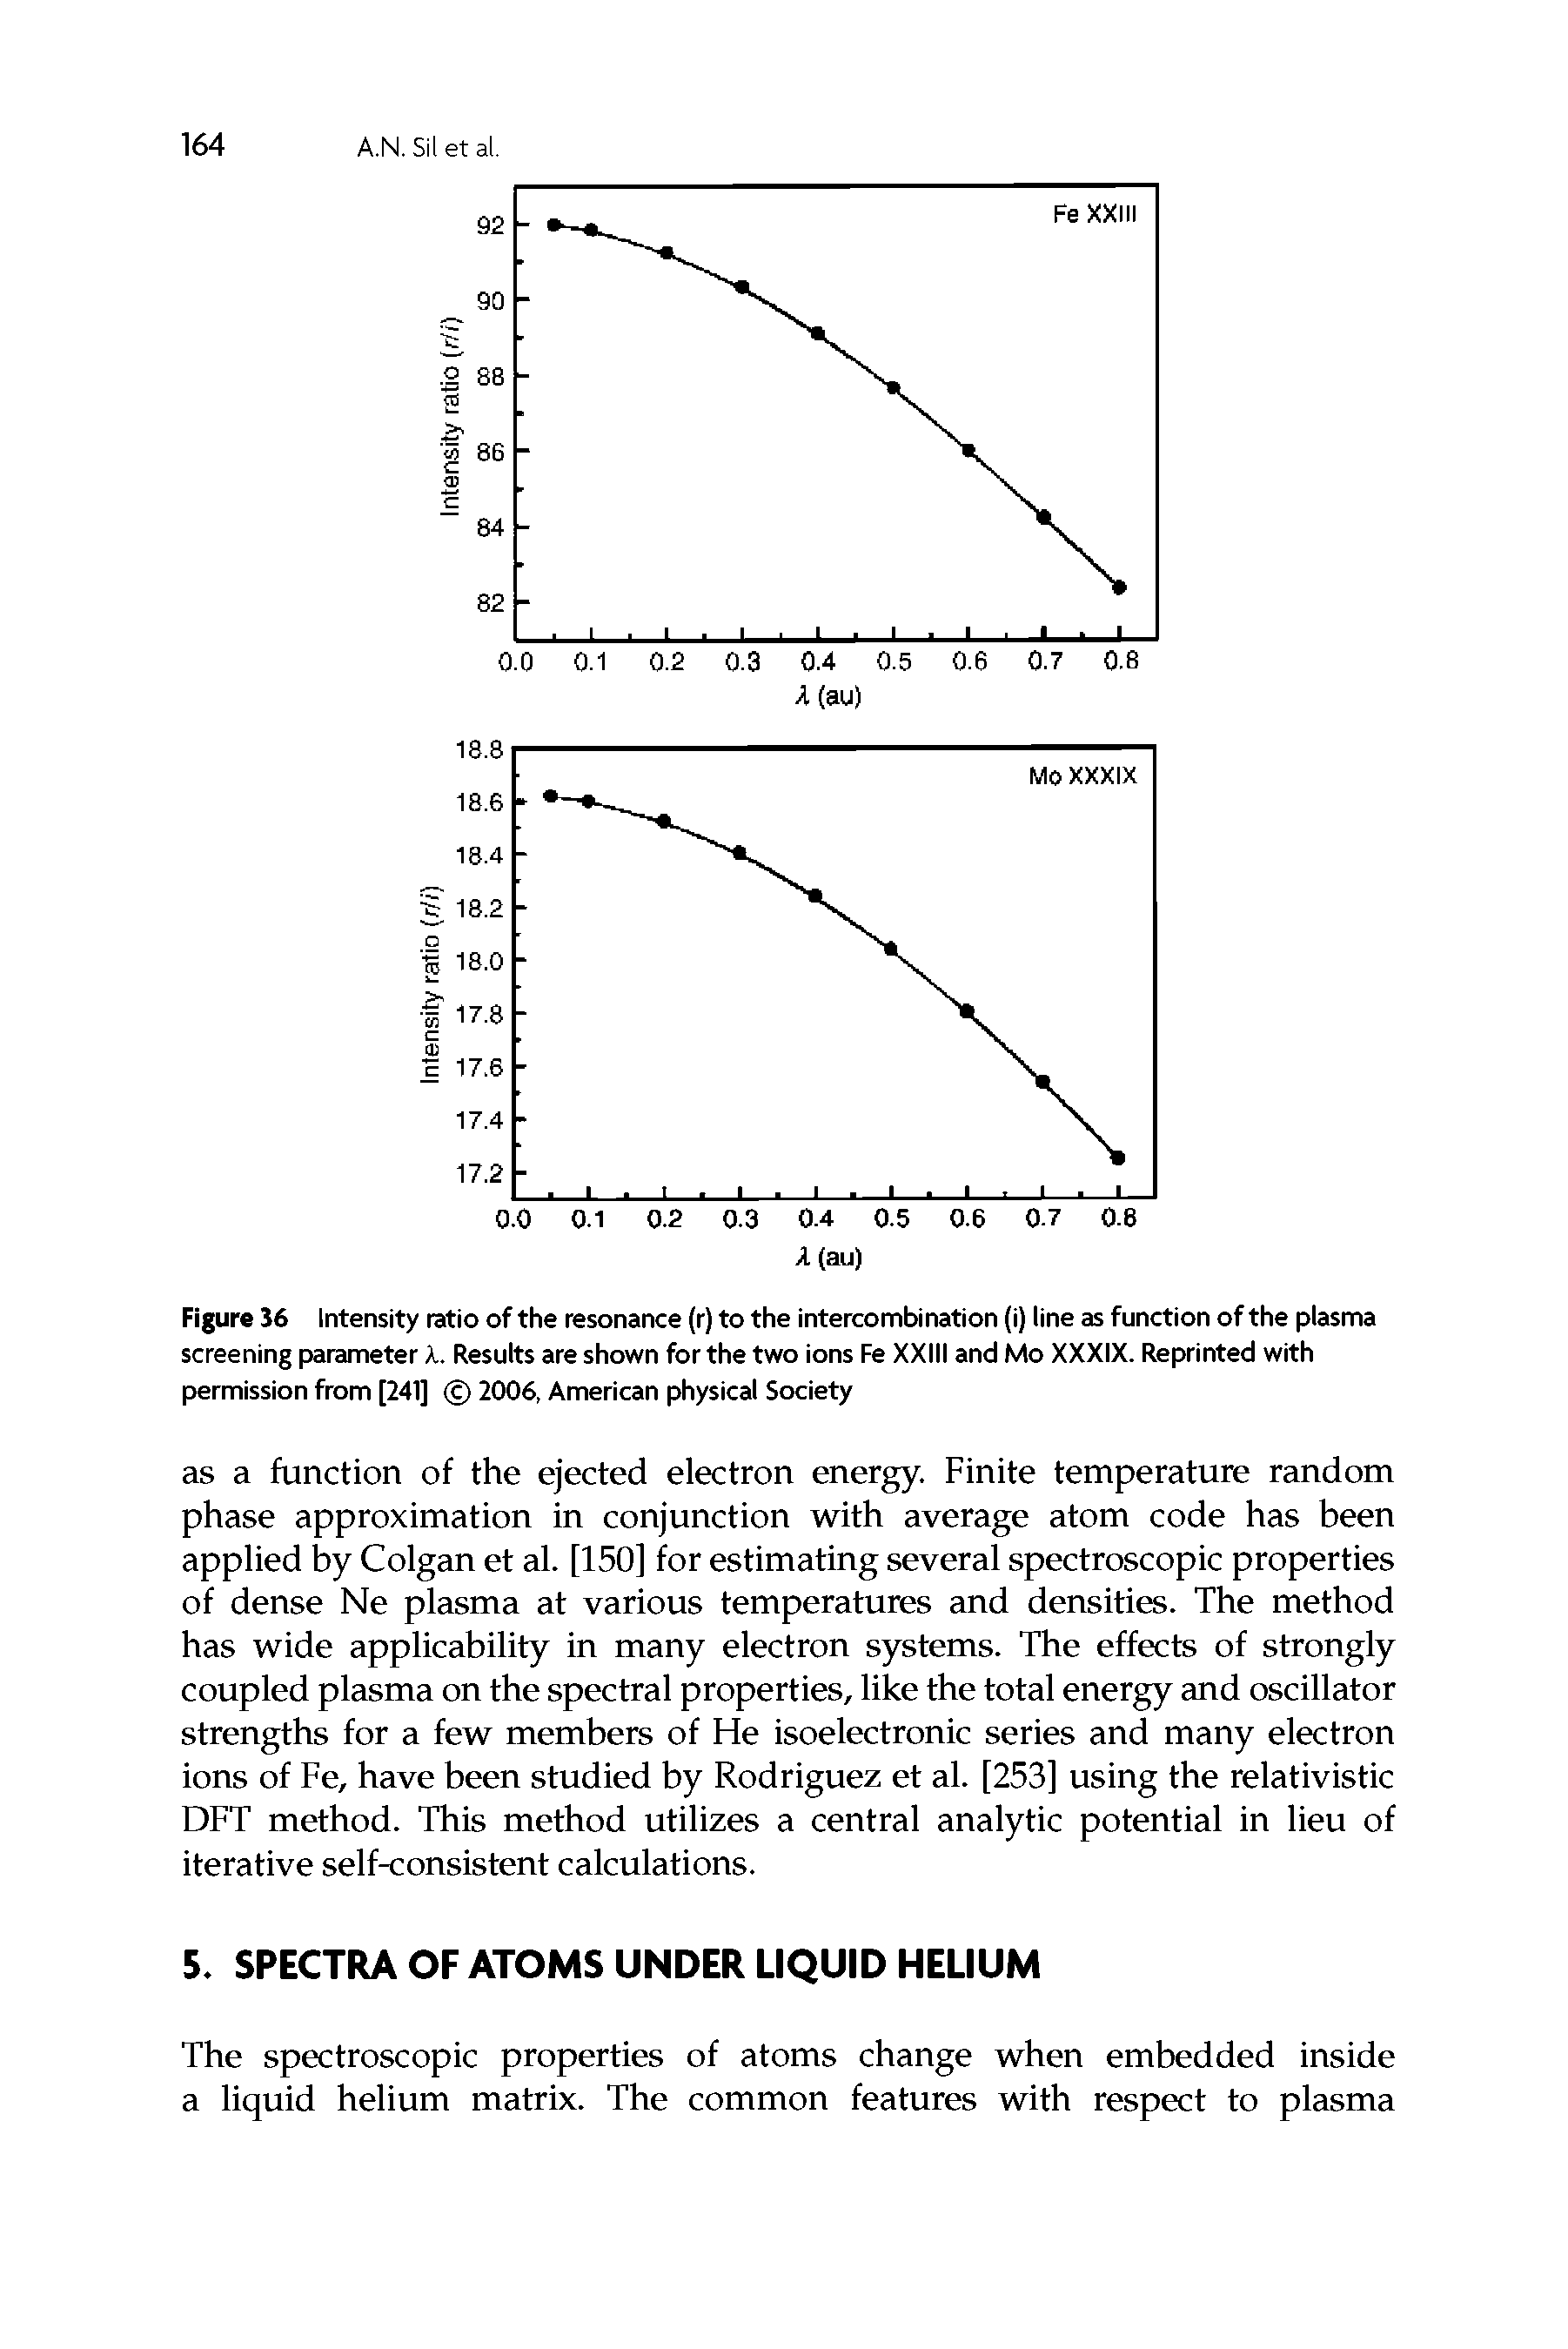 Figure 16 Intensity ratio of the resonance (r) to the intercombination (i) line as function of the plasma screening parameter X. Results are shown for the two ions Fe XXIII and Mo XXXIX. Reprinted with permission from [241] 2006, American physical Society...